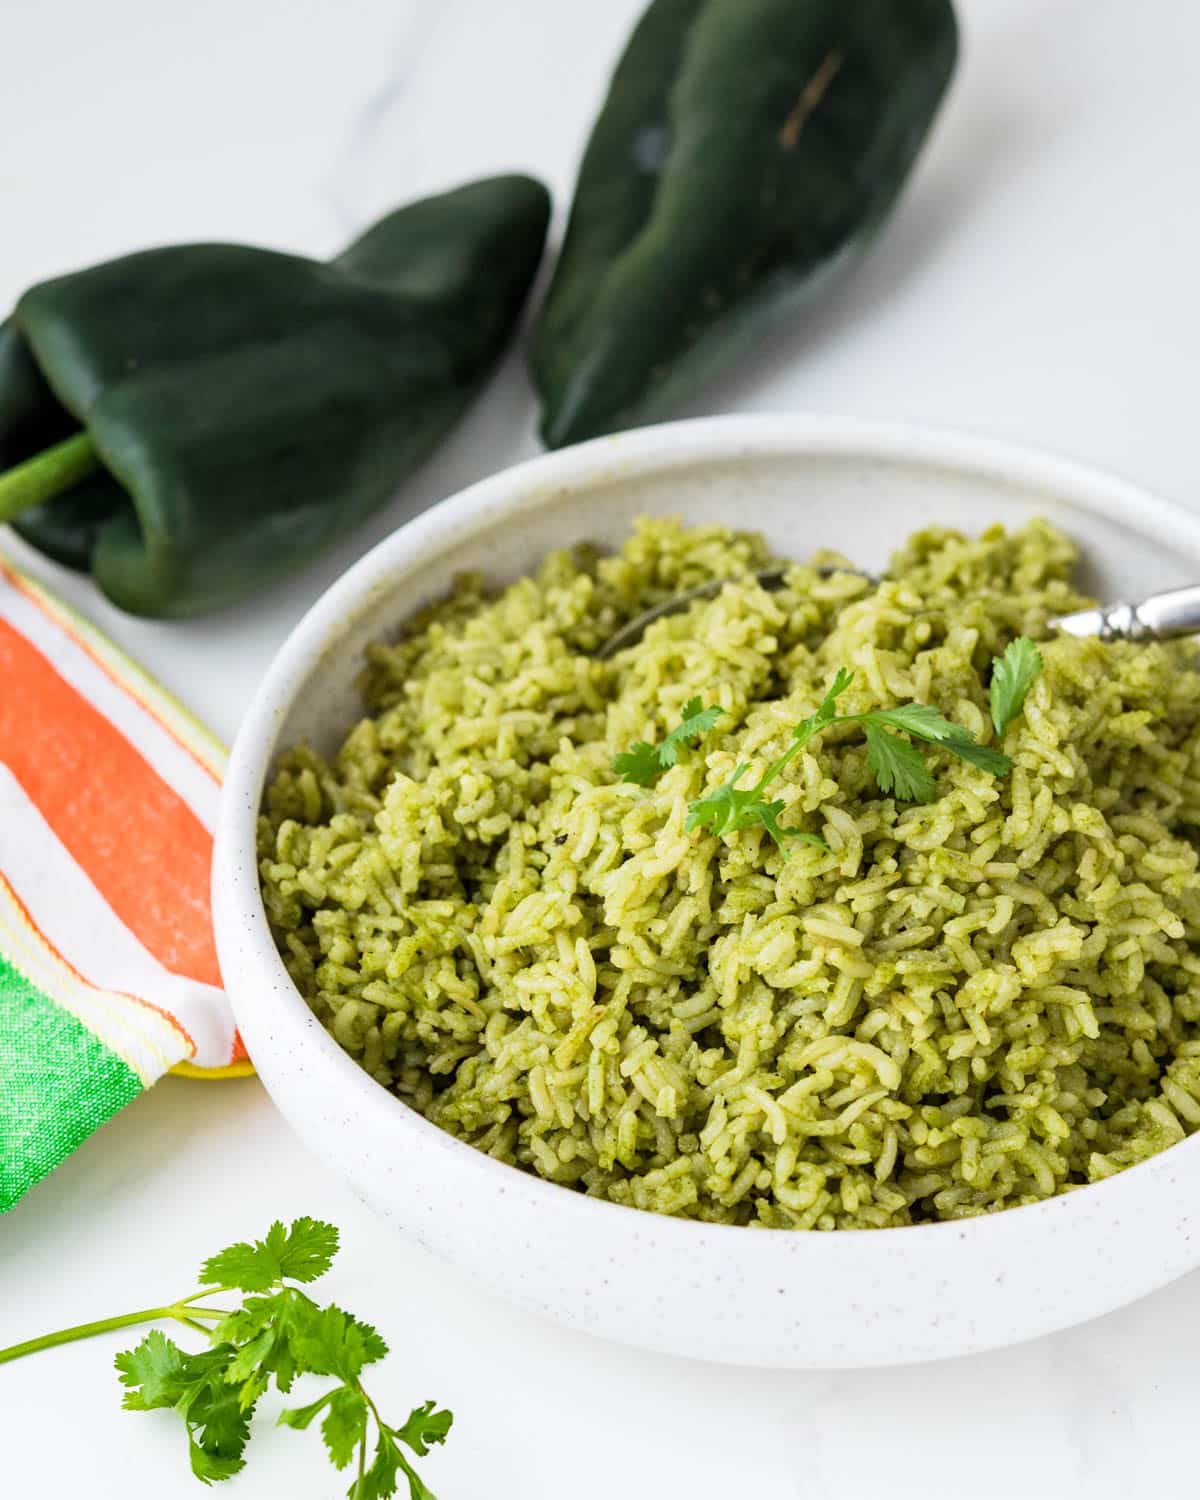 A bowl of Mexican green rice with a sprig of cilantro for garnish.